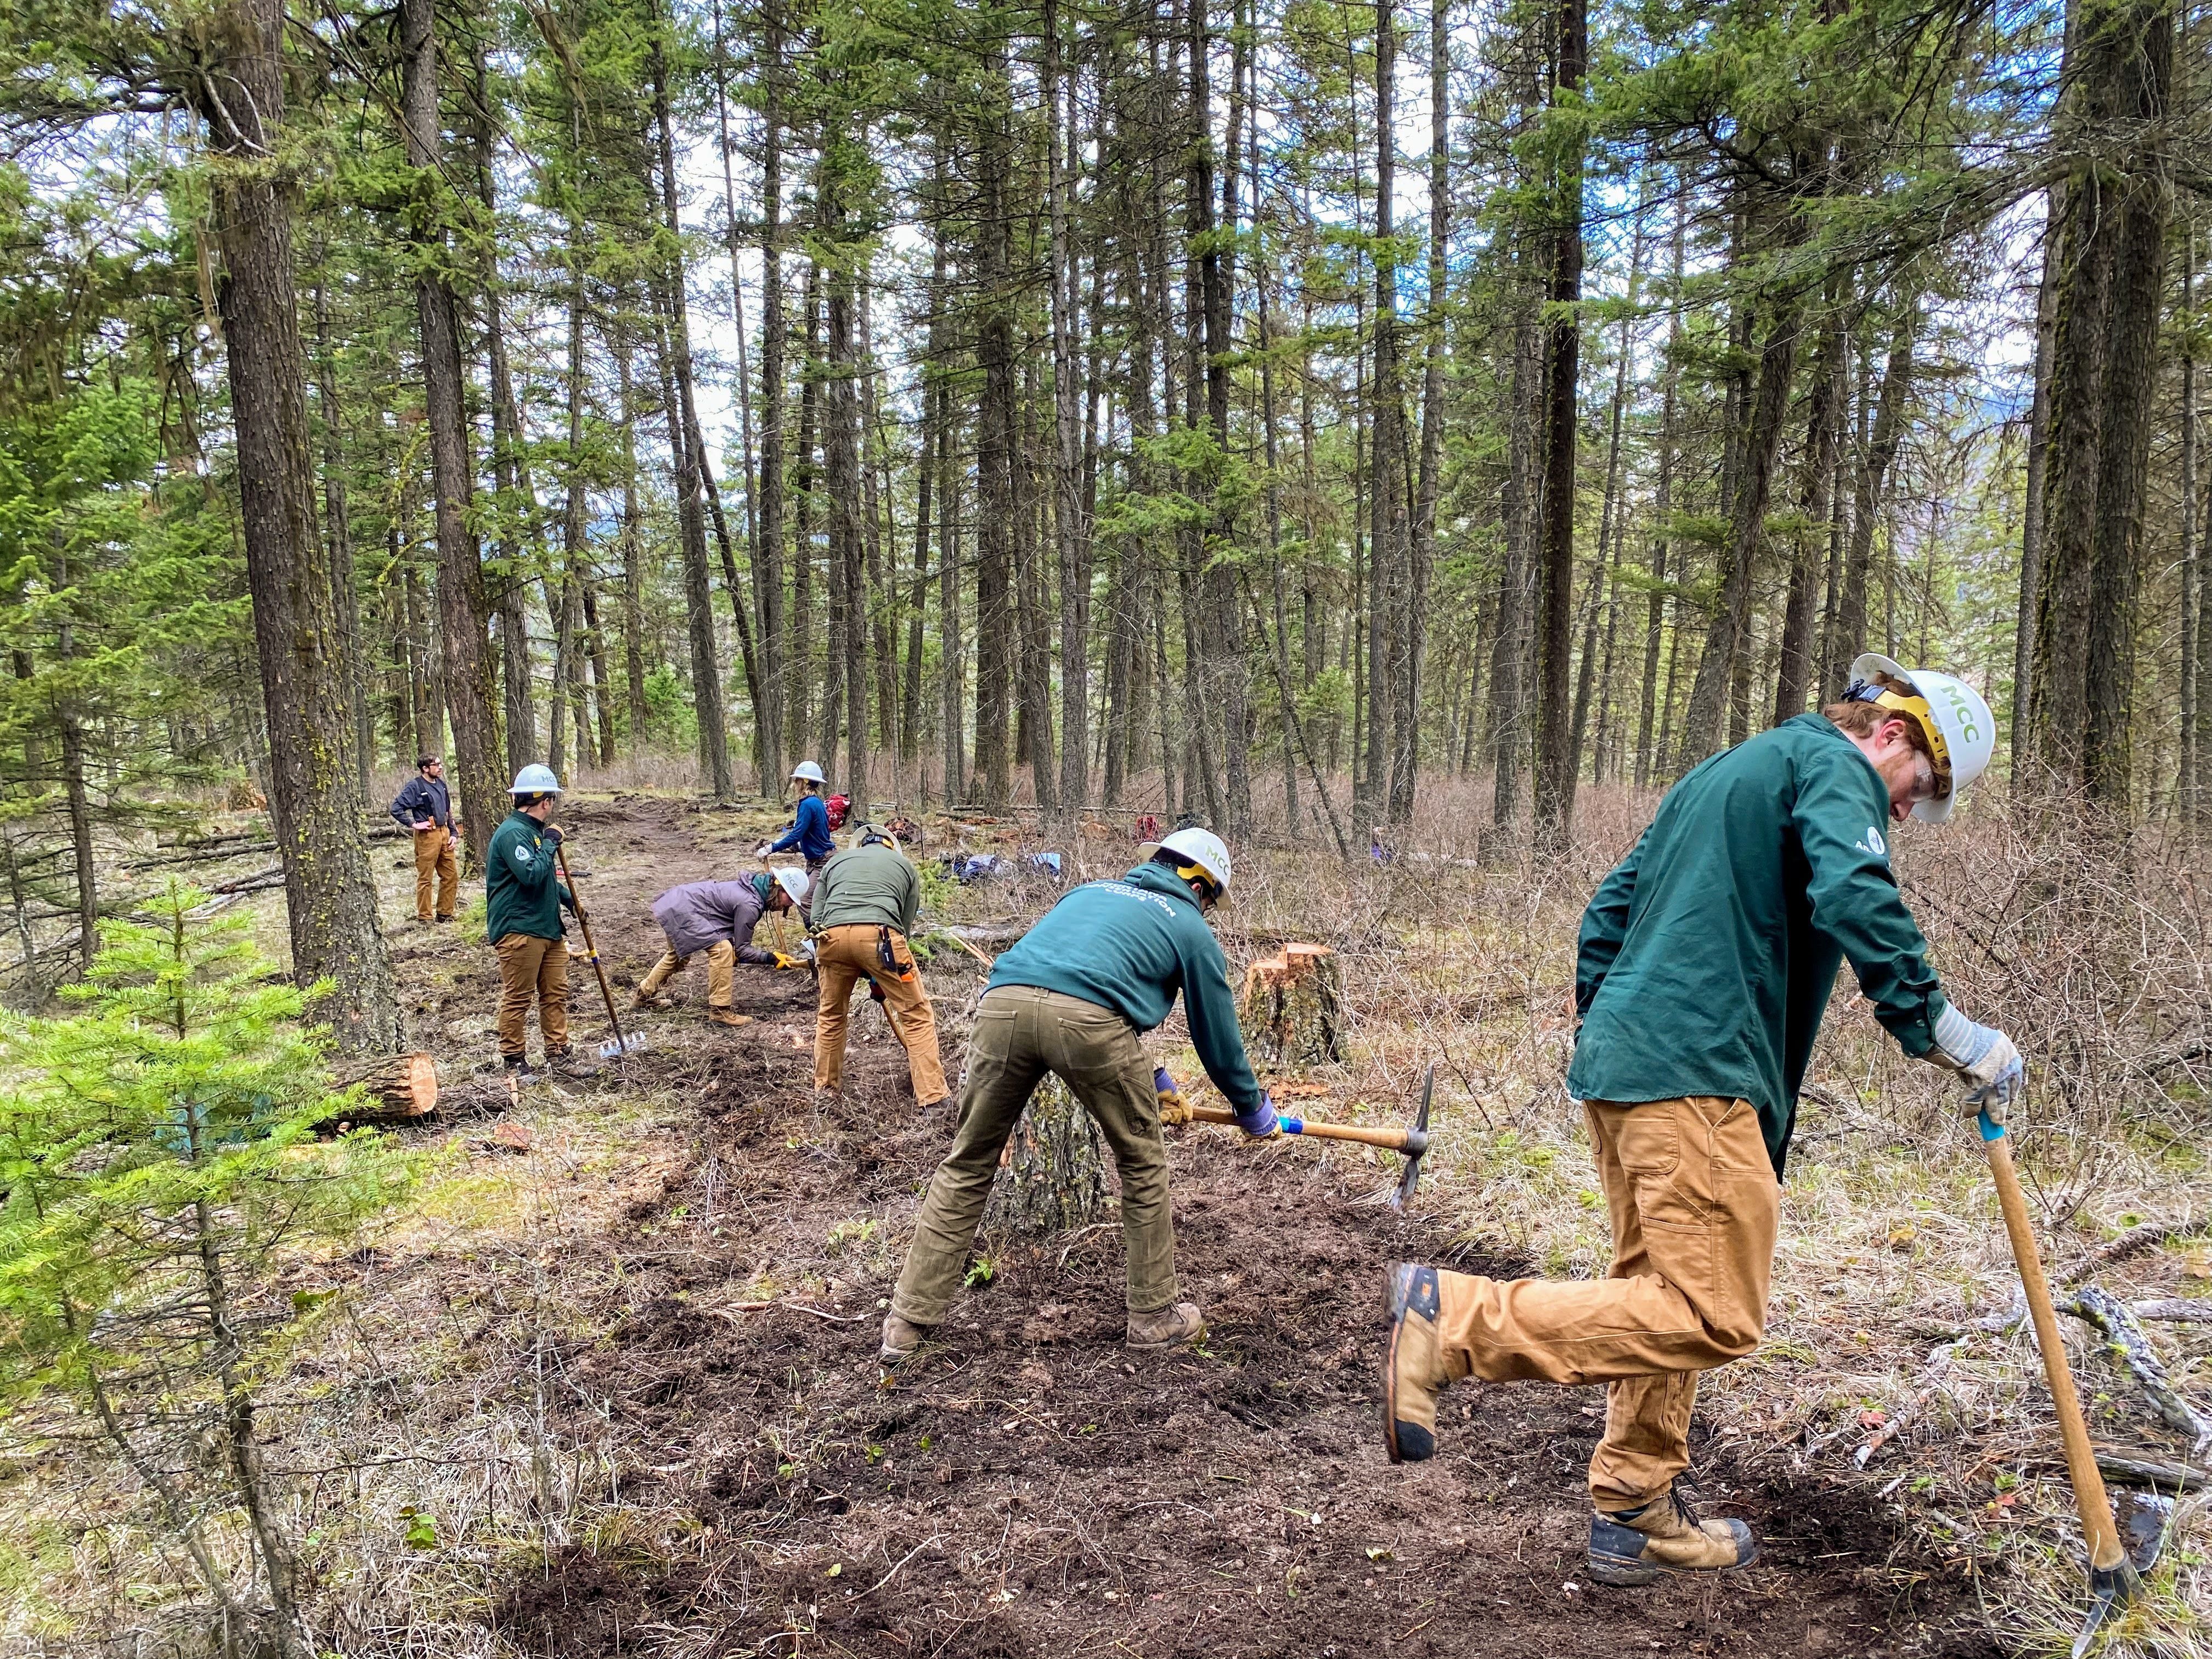 An MCC crew cuts new trail through a forest using handtools.